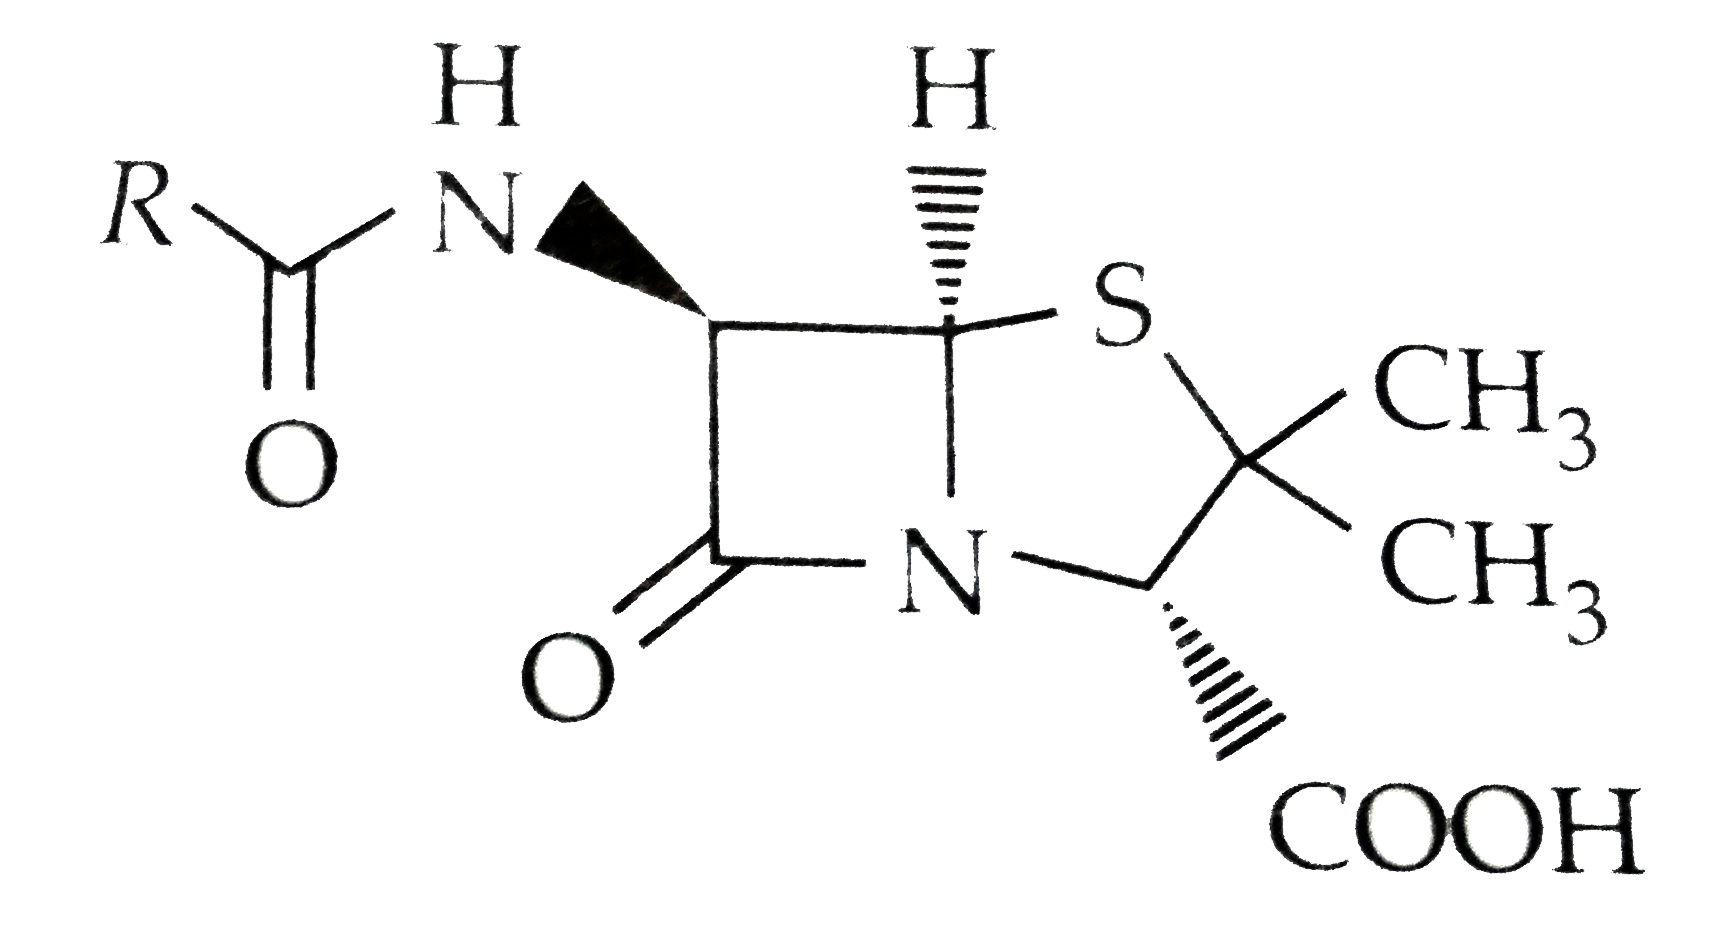 Name of the drug whose structure given below is